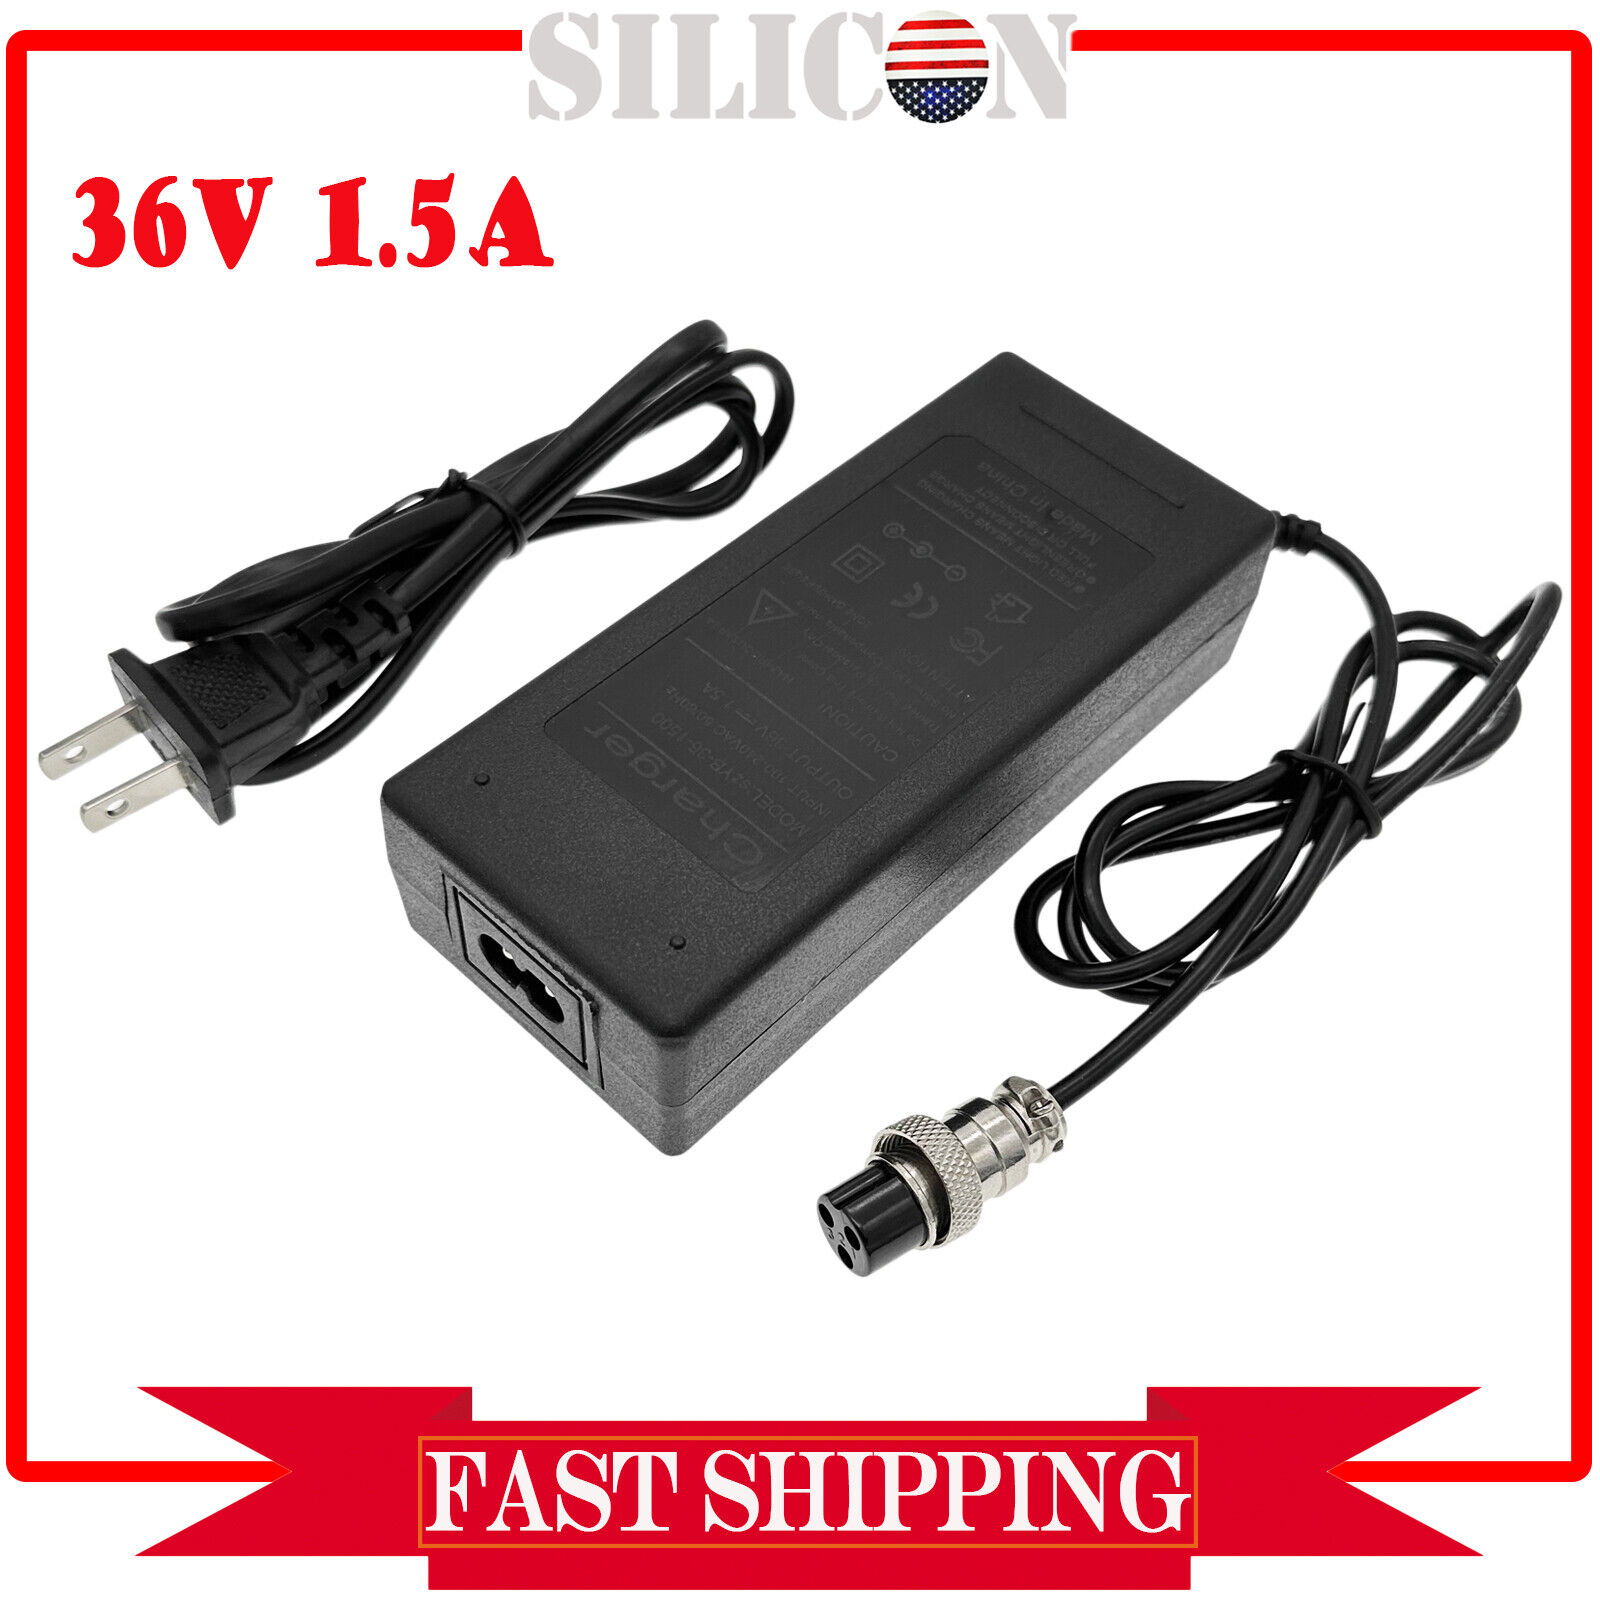 New 36 Volt Electric Scooter Battery Charger For E-Scooter Minimoto ATV Spirit New 36 Volt Electric Scooter Battery Cha